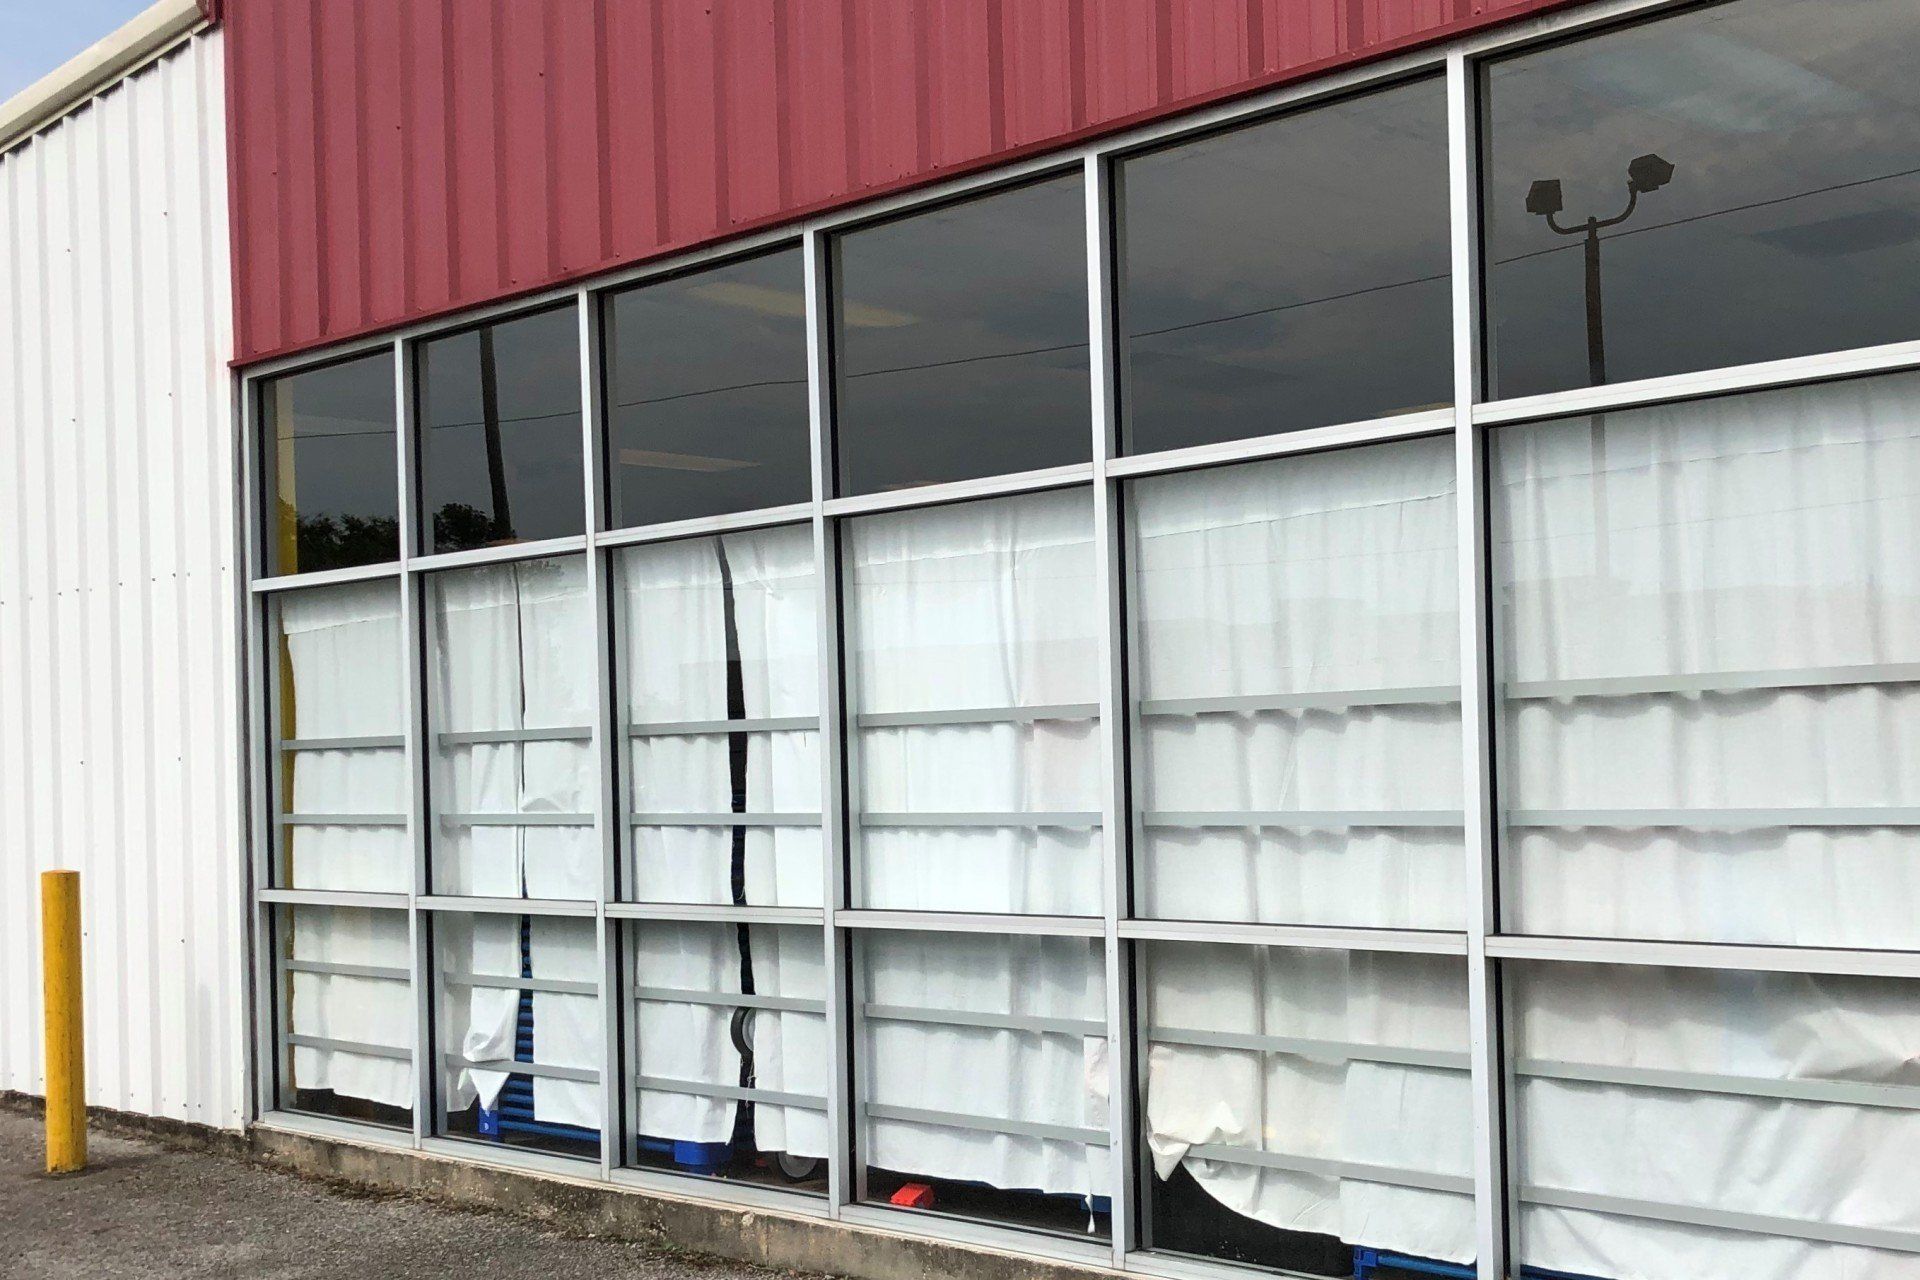 Business Window Tint installation adding privacy and heat rejection in Montgomery, AL